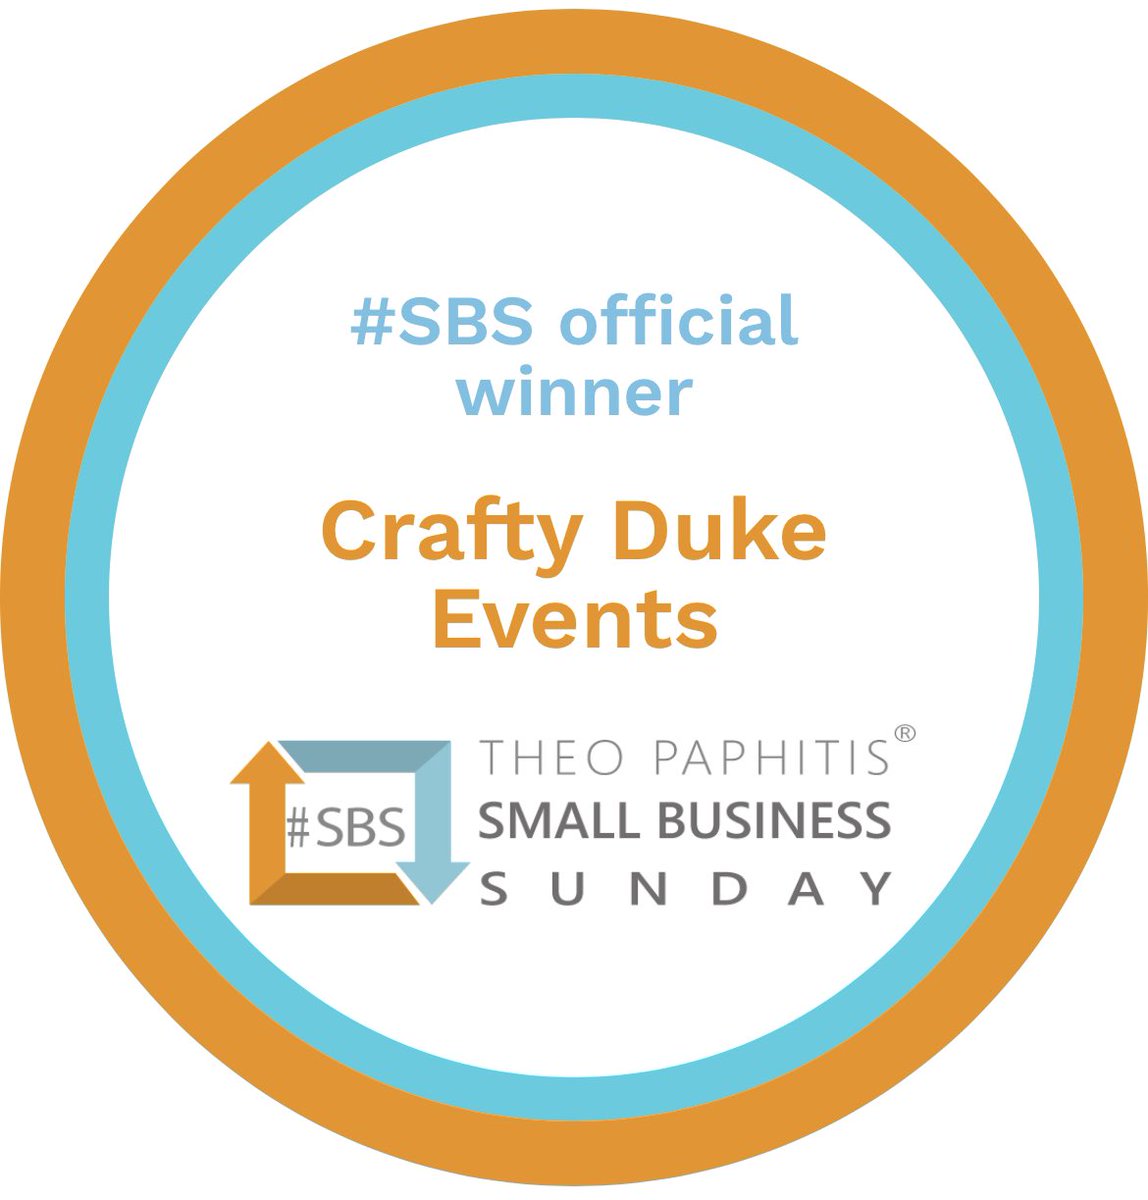 It’s official, we have the badge to prove it 🥳🌟🏆 #SBSWinner #SmallBusiness